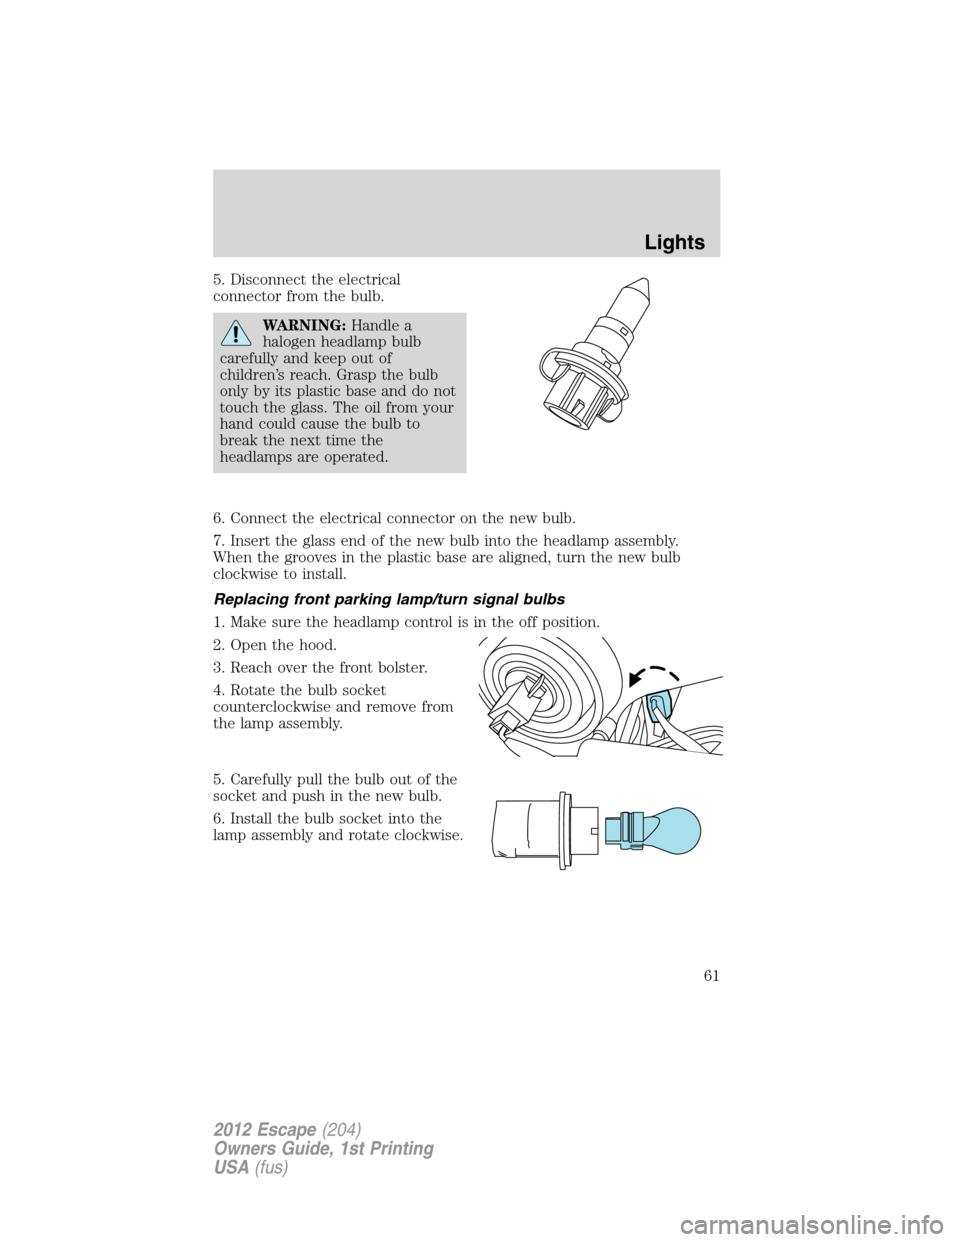 FORD ESCAPE 2012 2.G Owners Manual 5. Disconnect the electrical
connector from the bulb.
WARNING:Handle a
halogen headlamp bulb
carefully and keep out of
children’s reach. Grasp the bulb
only by its plastic base and do not
touch the 